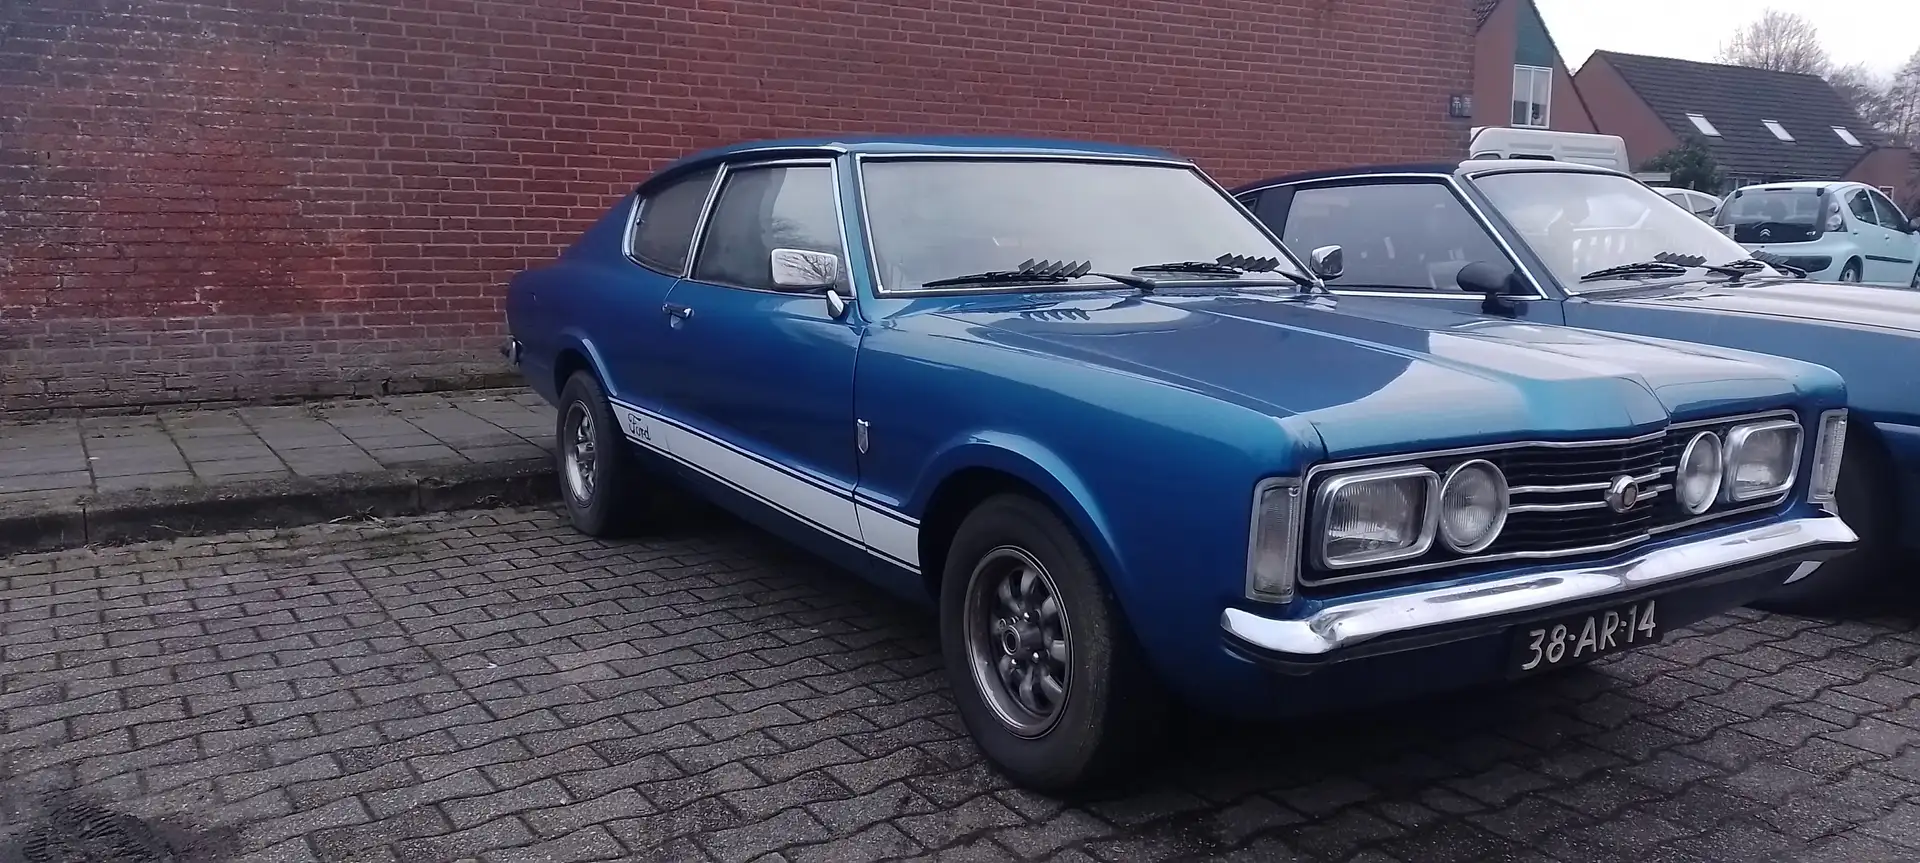 Ford Taunus xl automatic coupe Blue - 2